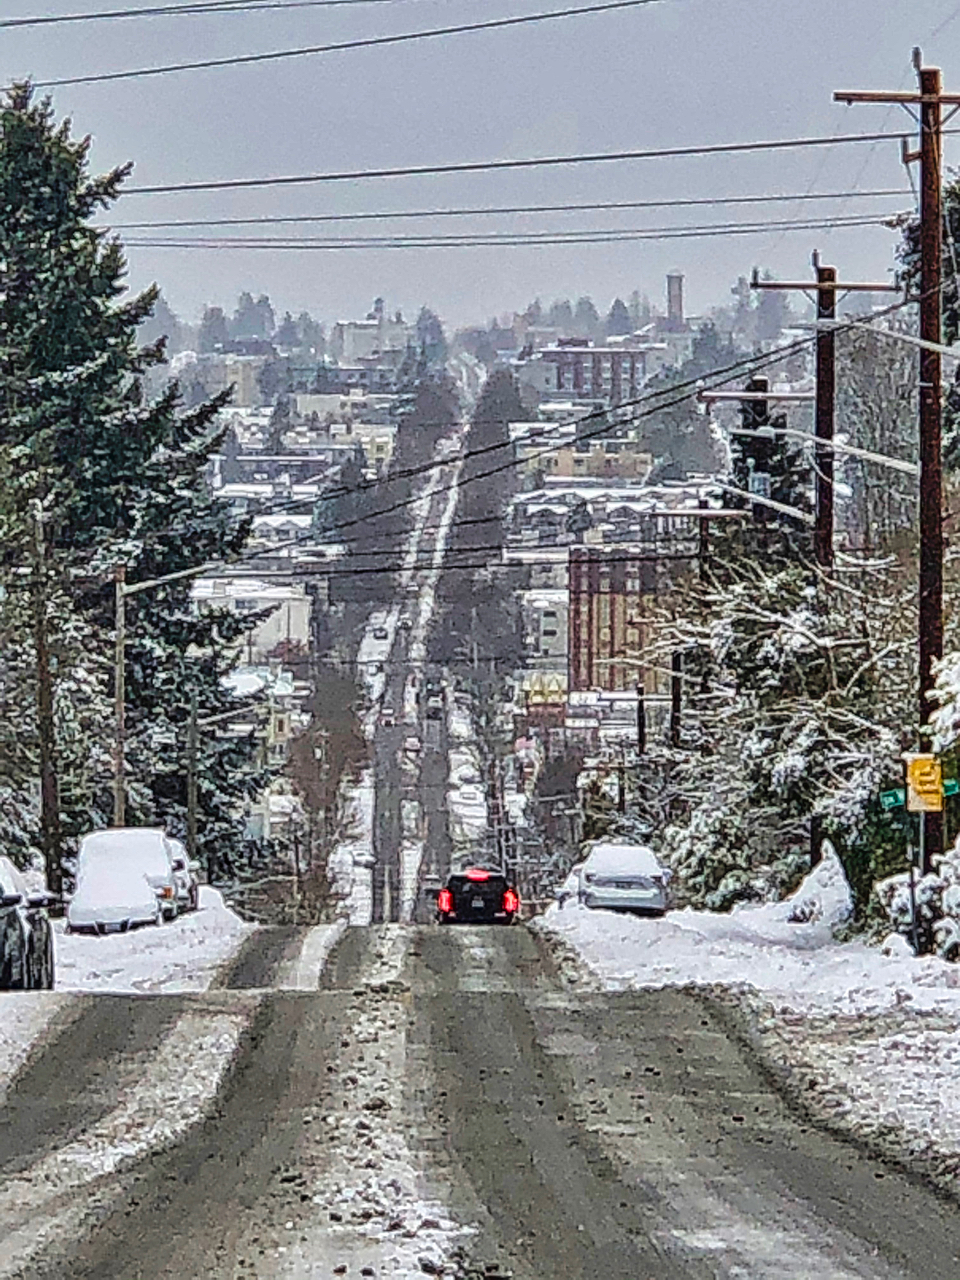 looking north on California Ave SW in the snow